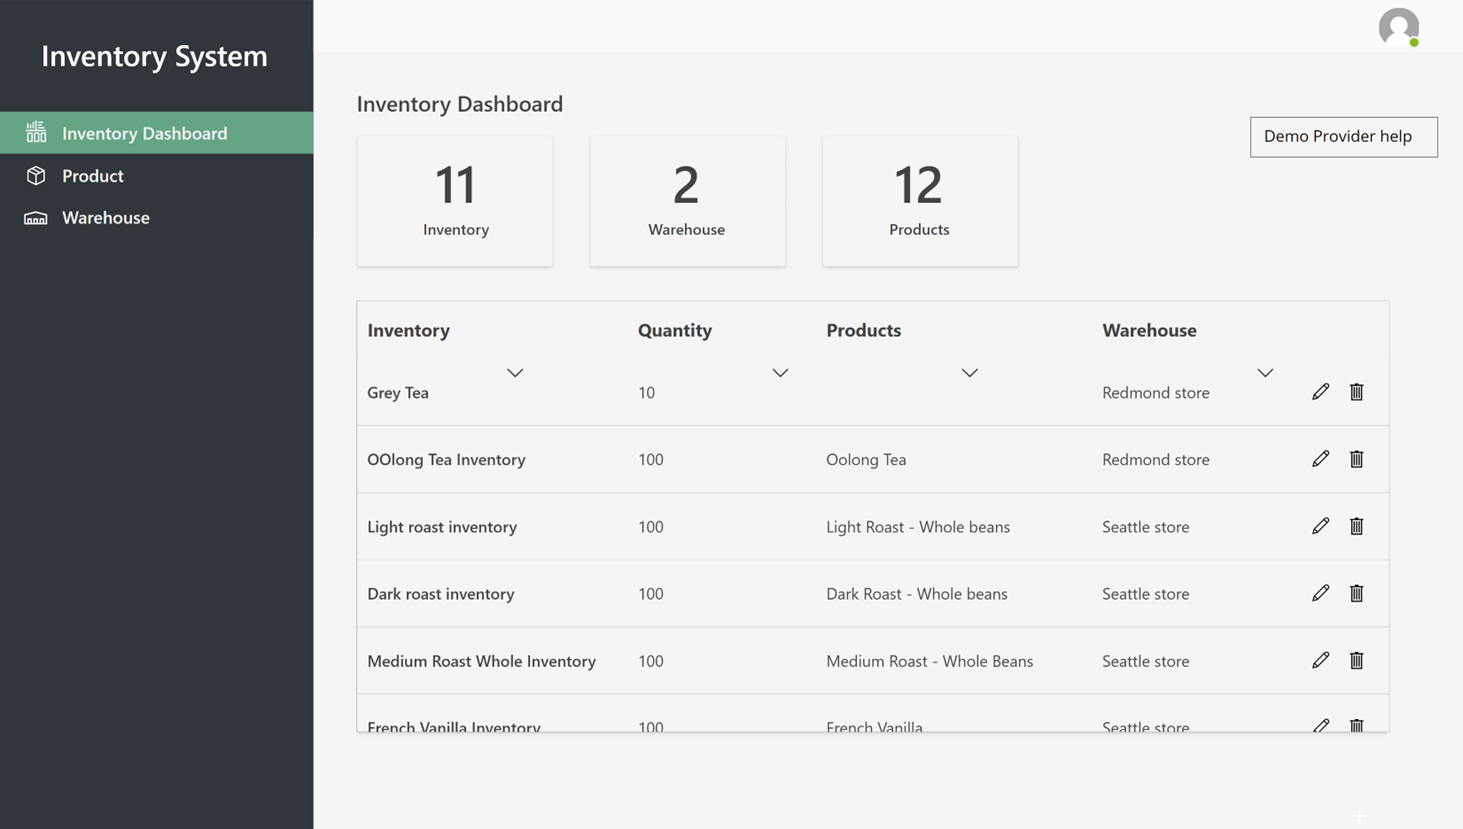 Inventory Dashboard page in the demo inventory app.